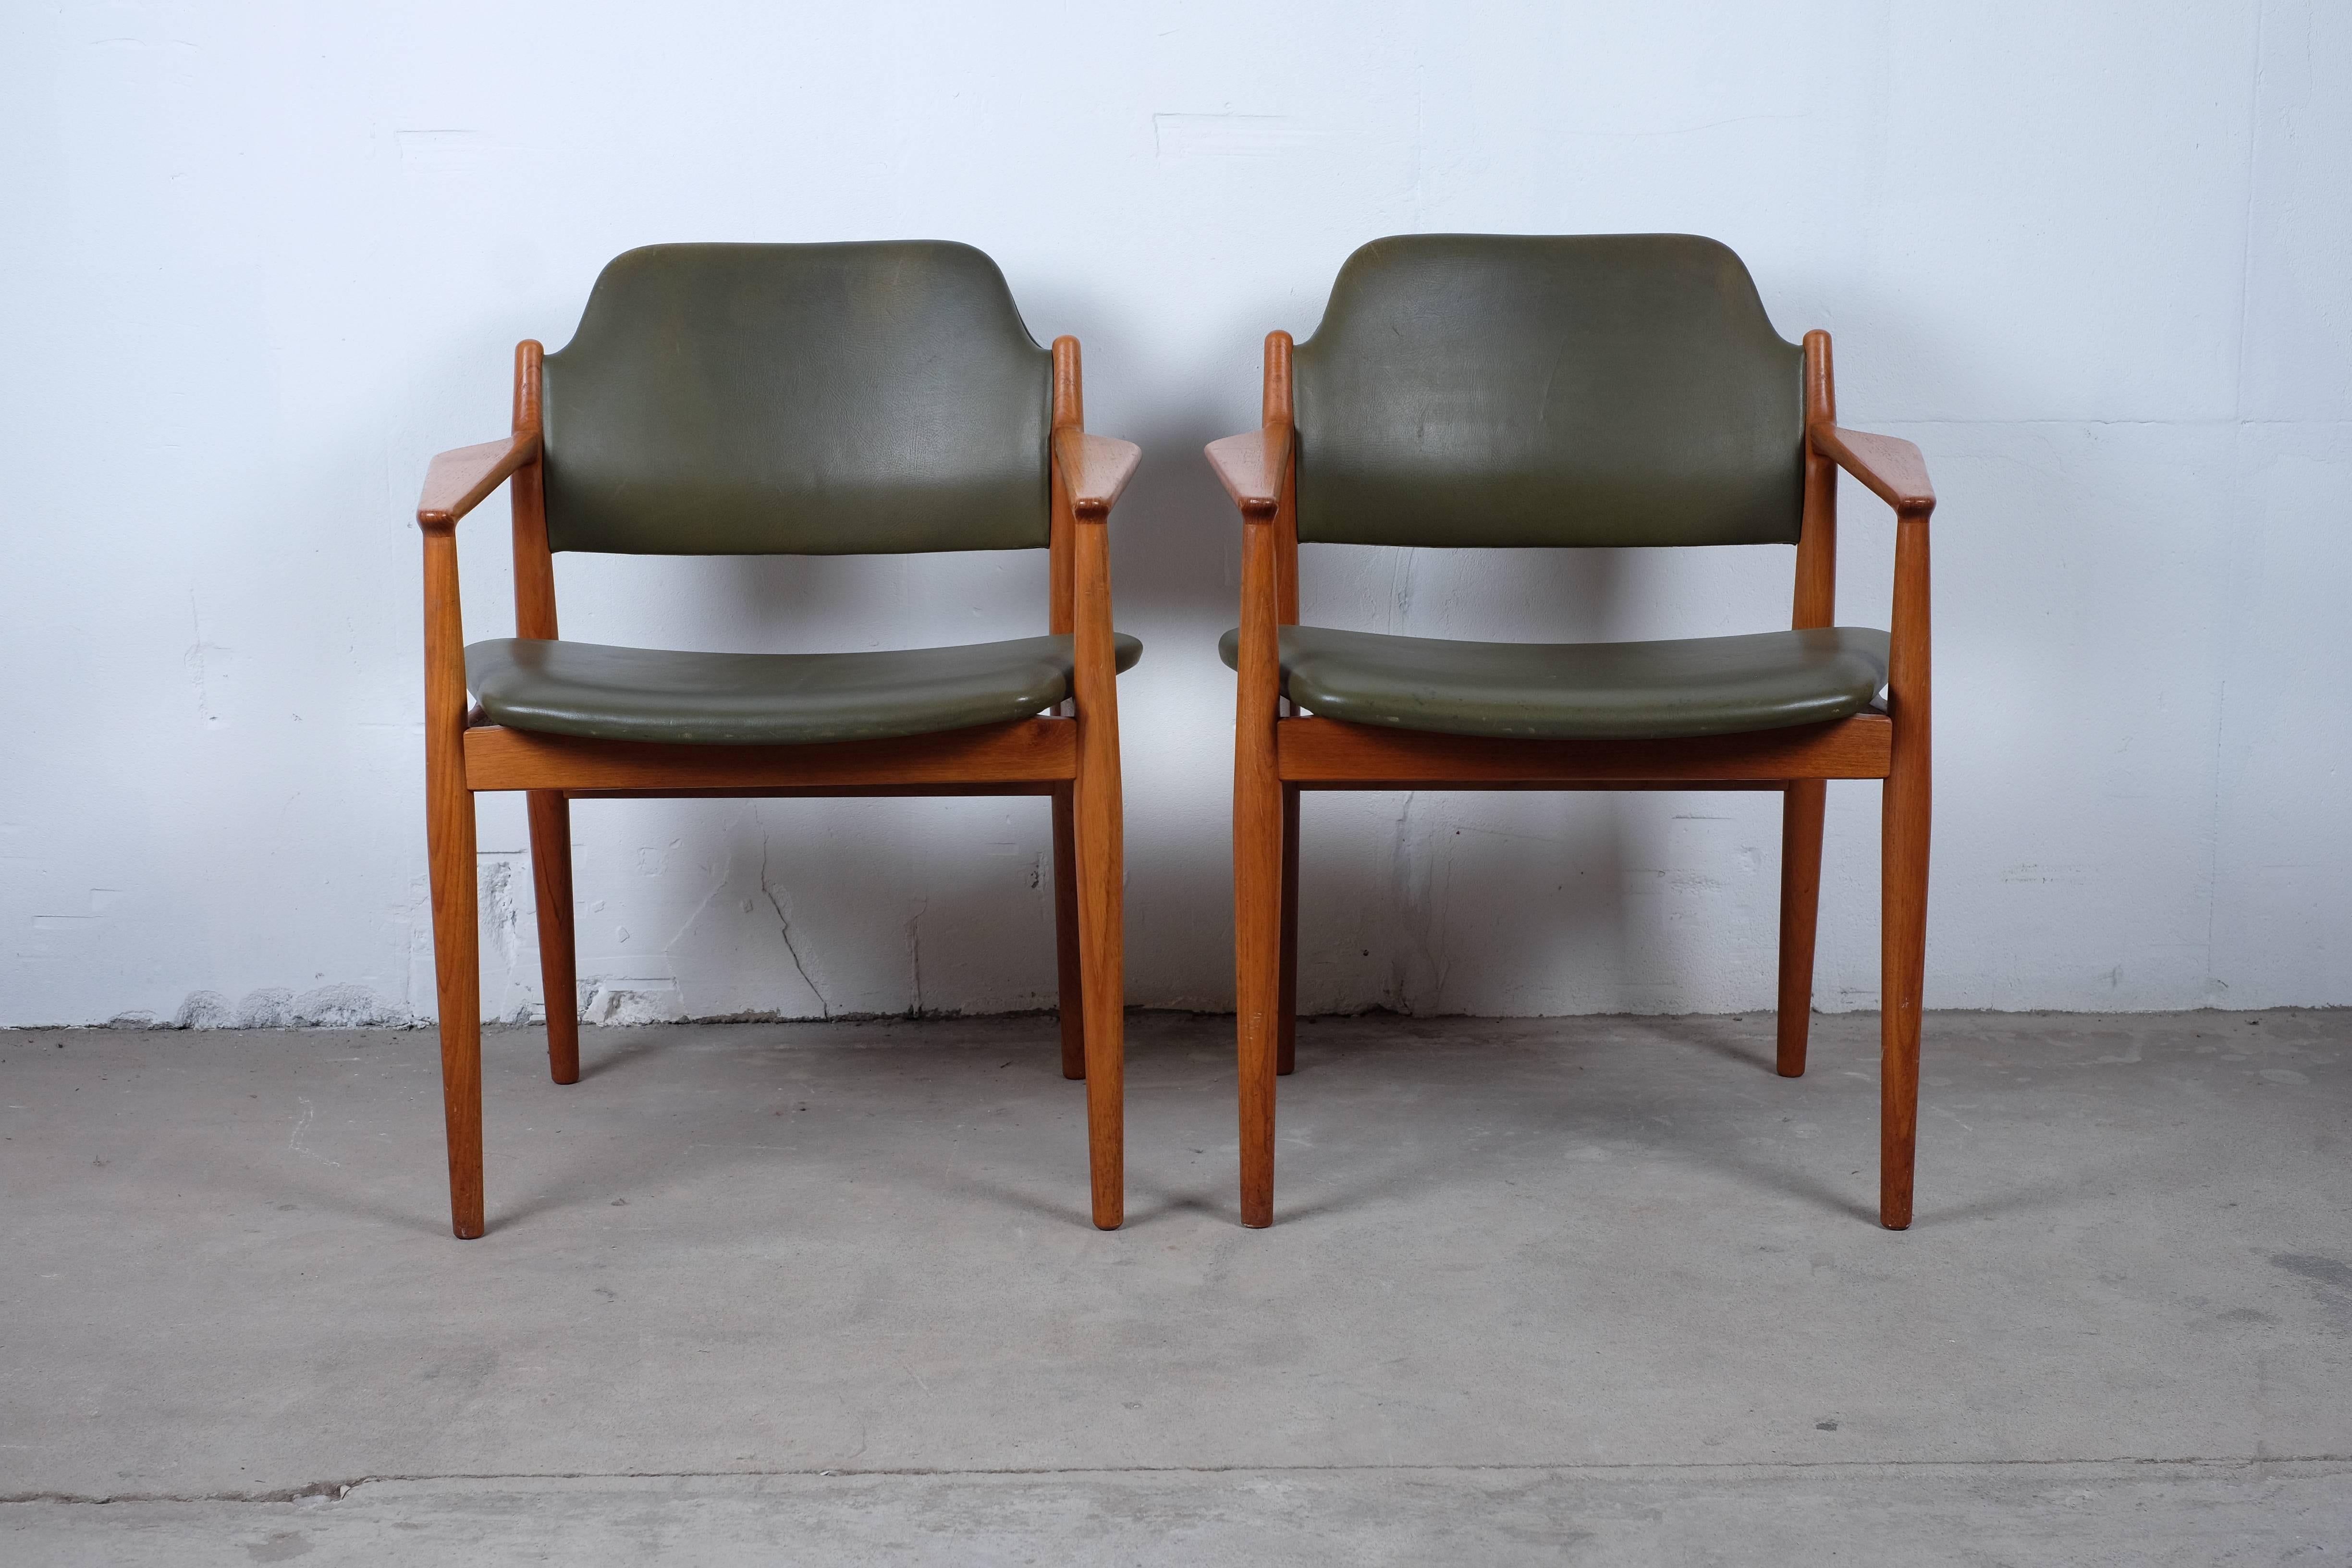 An awesome set of two teak armchairs by Arne Vodder for Sibast. 

The flared armrests and floating seats makes this chair very beautiful and the proportions and contoured backrest make them very comfortable to sit in.

The frames are constructed